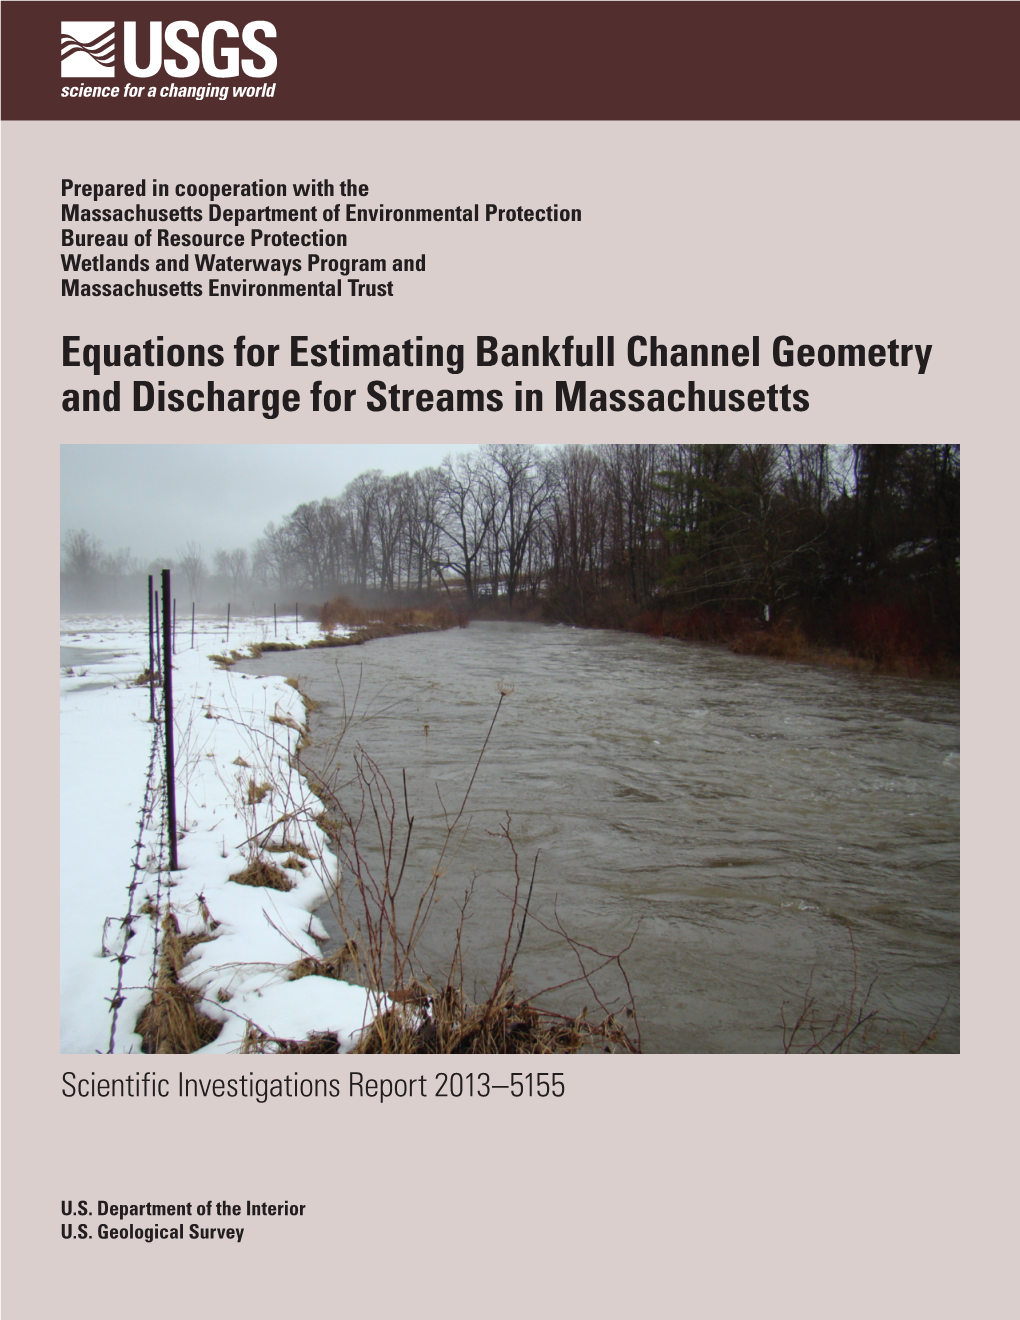 Equations for Estimating Bankfull Channel Geometry and Discharge for Streams in Massachusetts